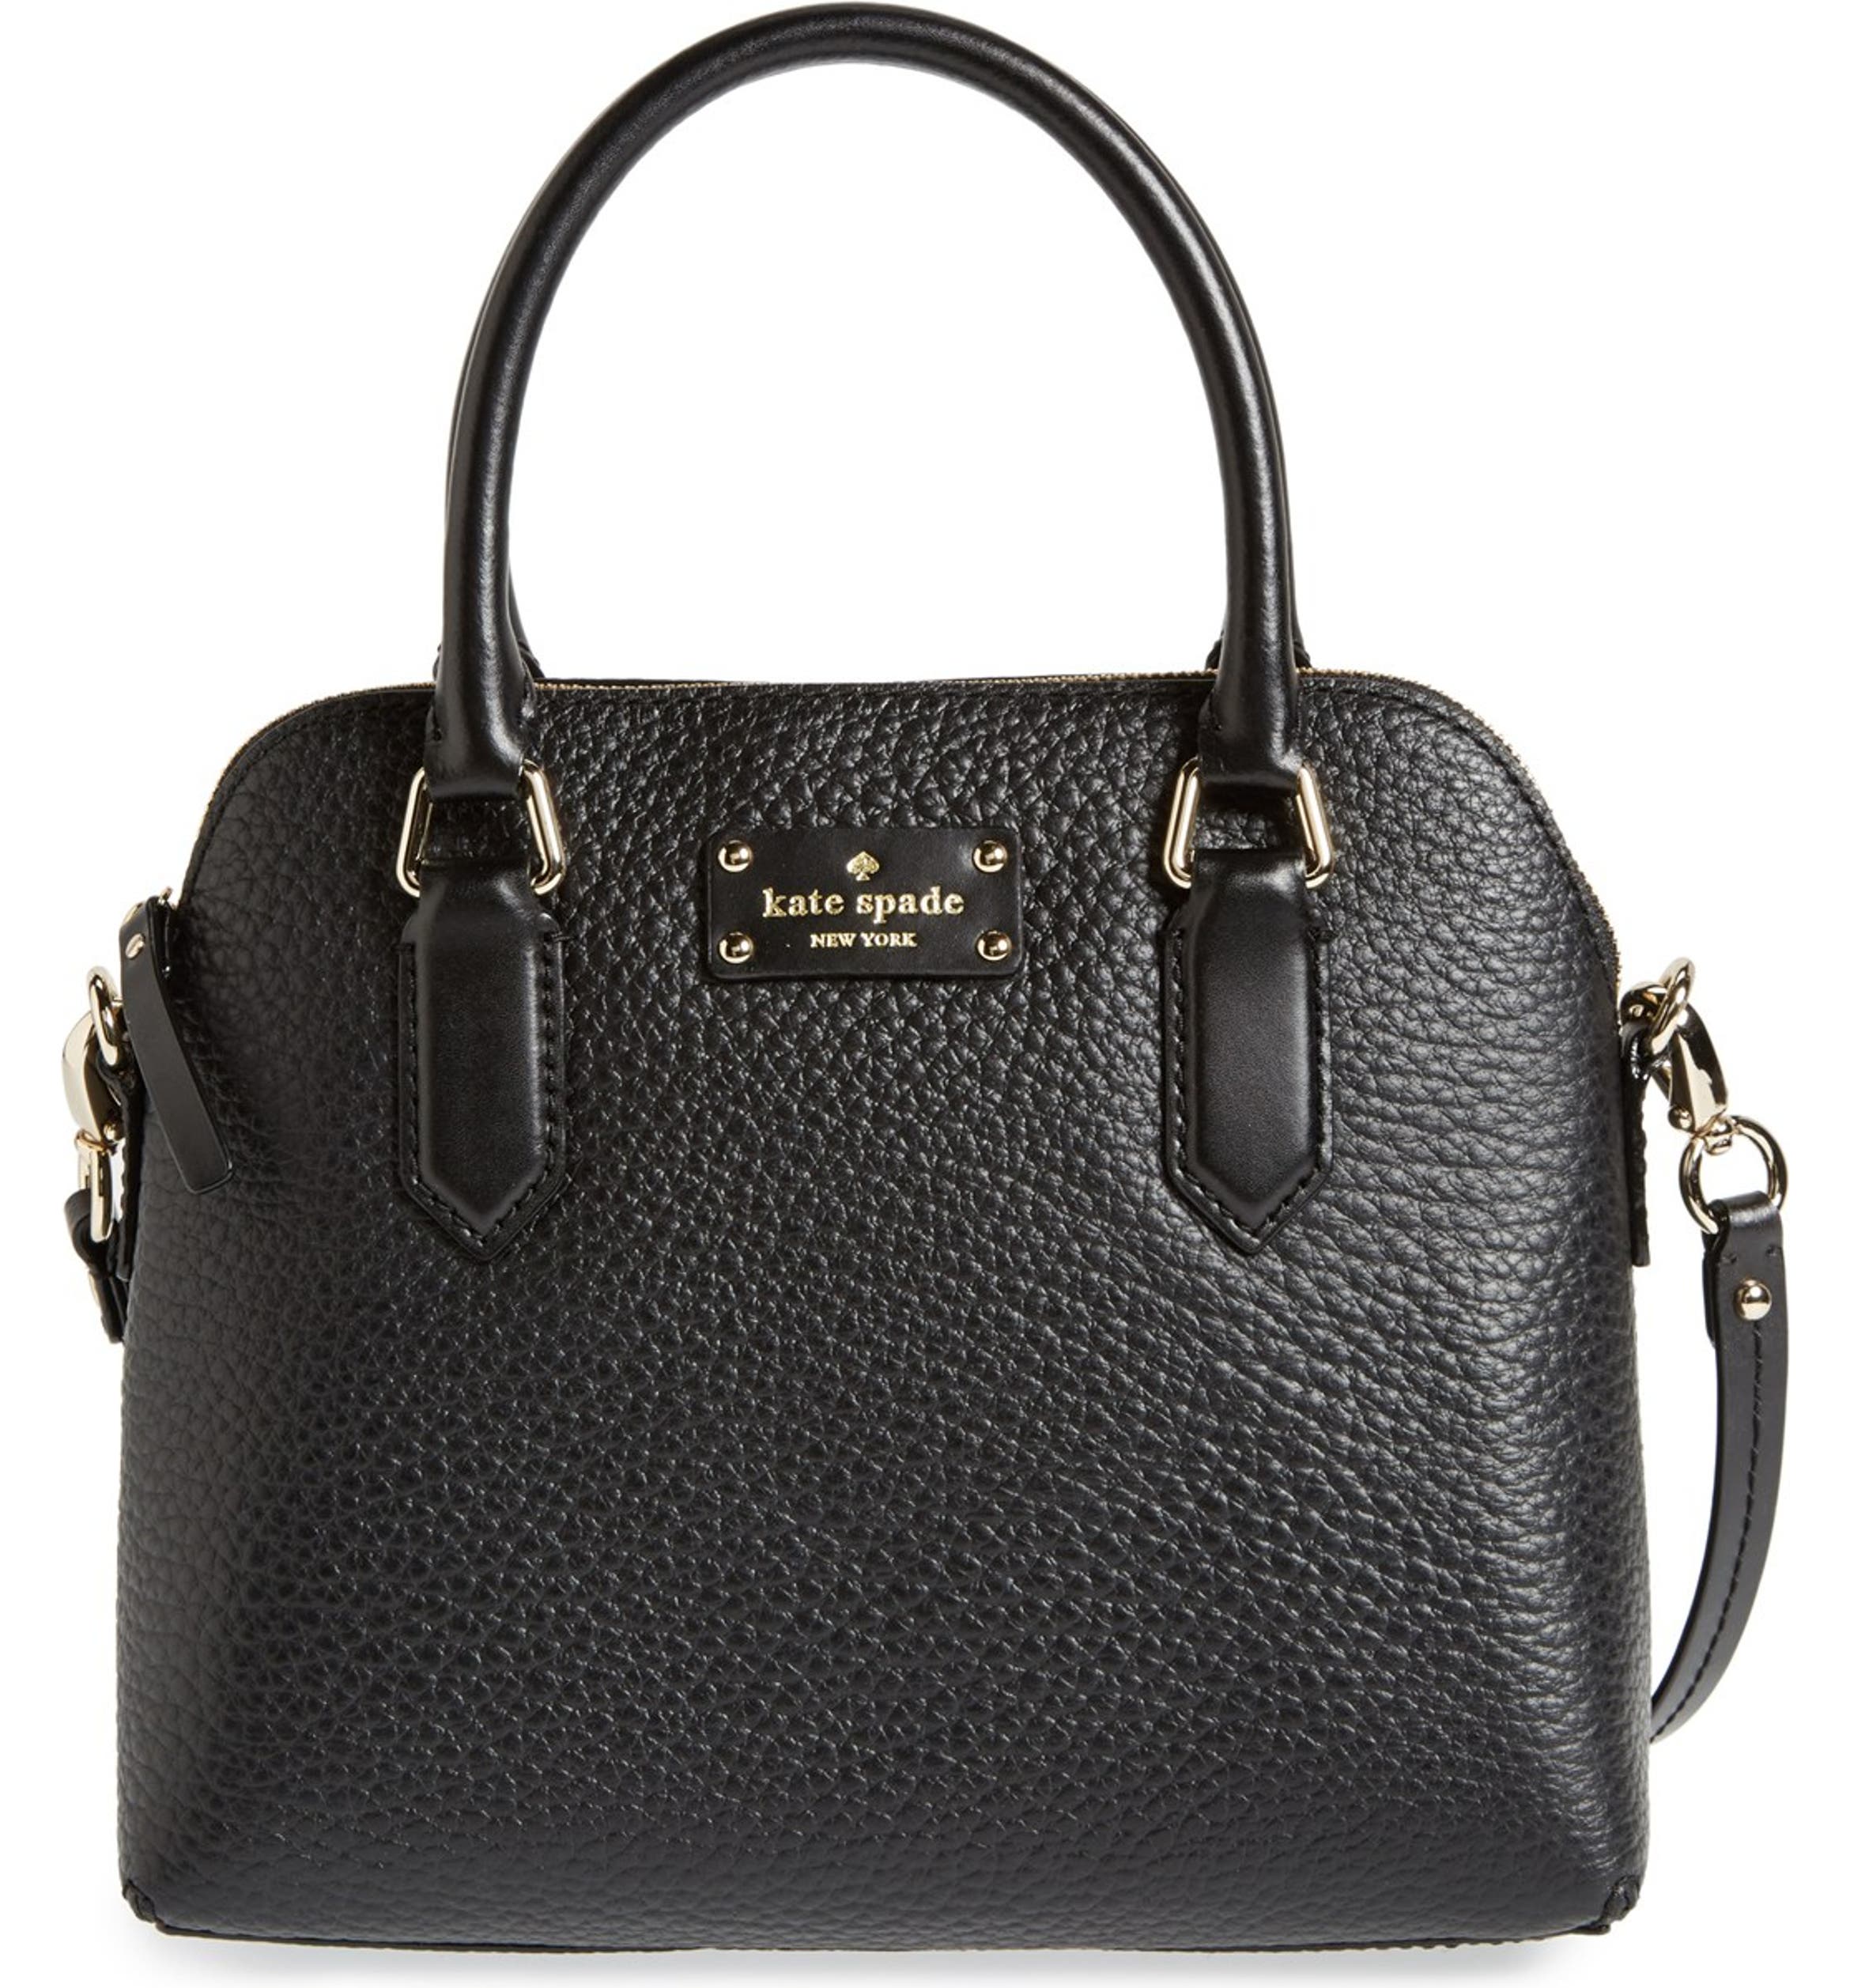 kate spade new york 'grove court - maise' leather satchel | Nordstrom